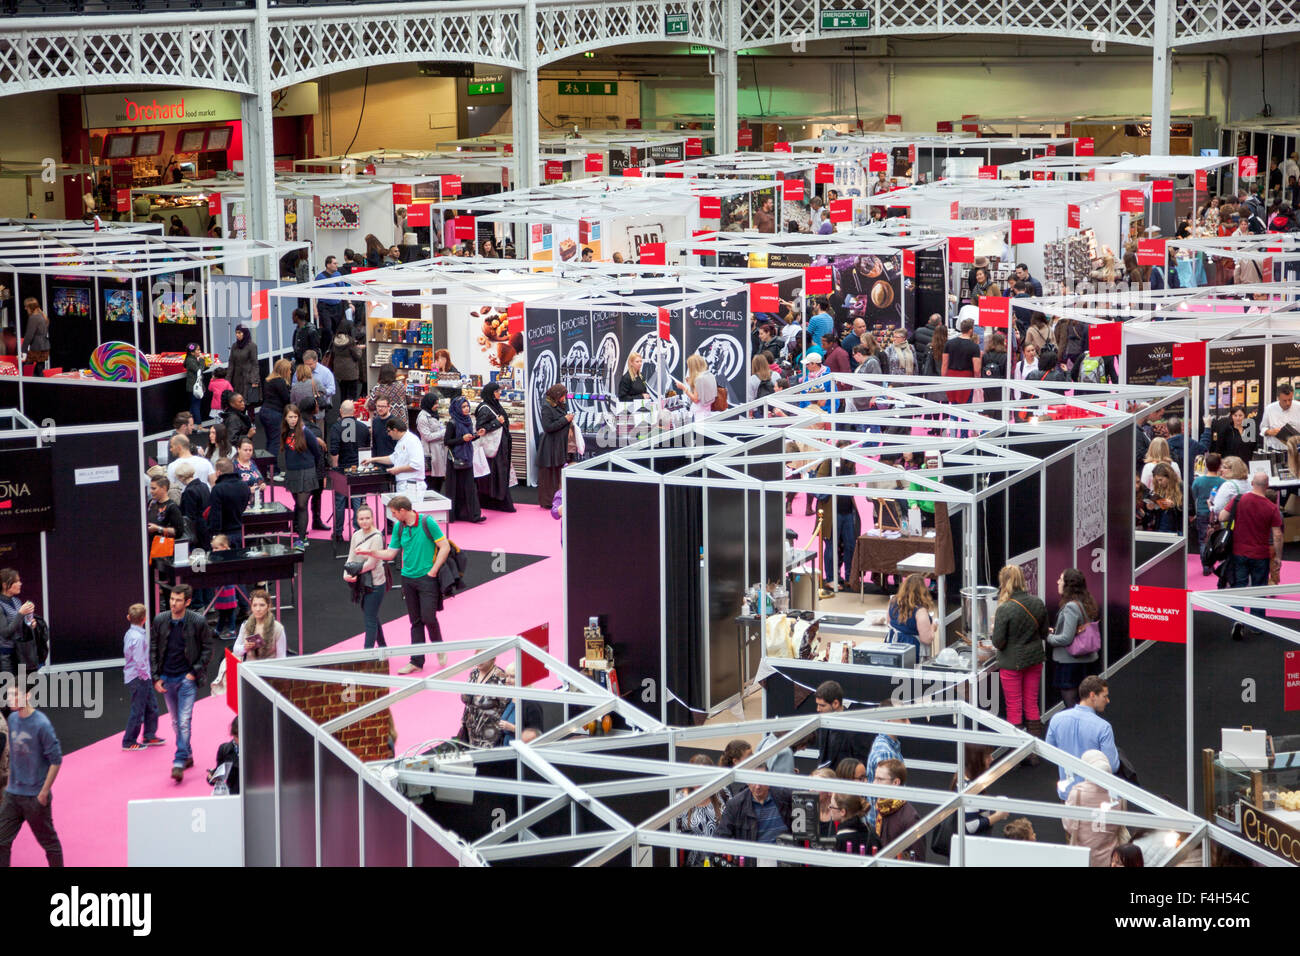 London, UK. 18th October 2015 - International specialists from the chocolate industry gather at Olympia Hall to exhibit at the annual Chocolate Show in London, UK’s largest chocolate event. Activities include workshops, presentations by famous chefs, demonstrations and a chocolate fashion show. Credit: Nathaniel Noir/Alamy Live News Stock Photo